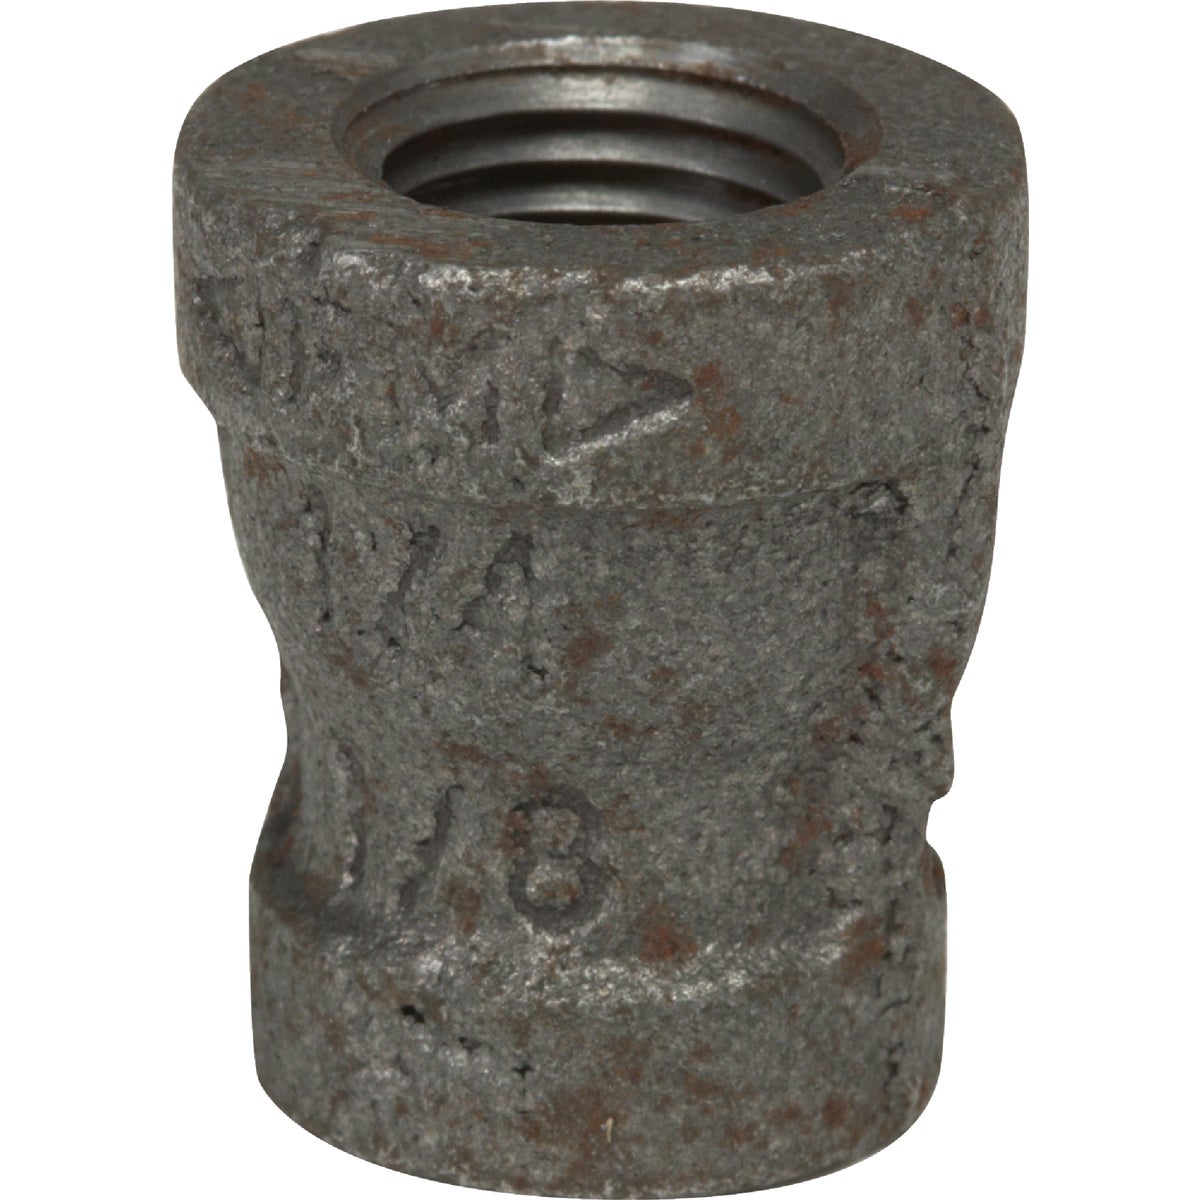 Item 433276, Made of Malleable iron which is designed for high tensile strength.